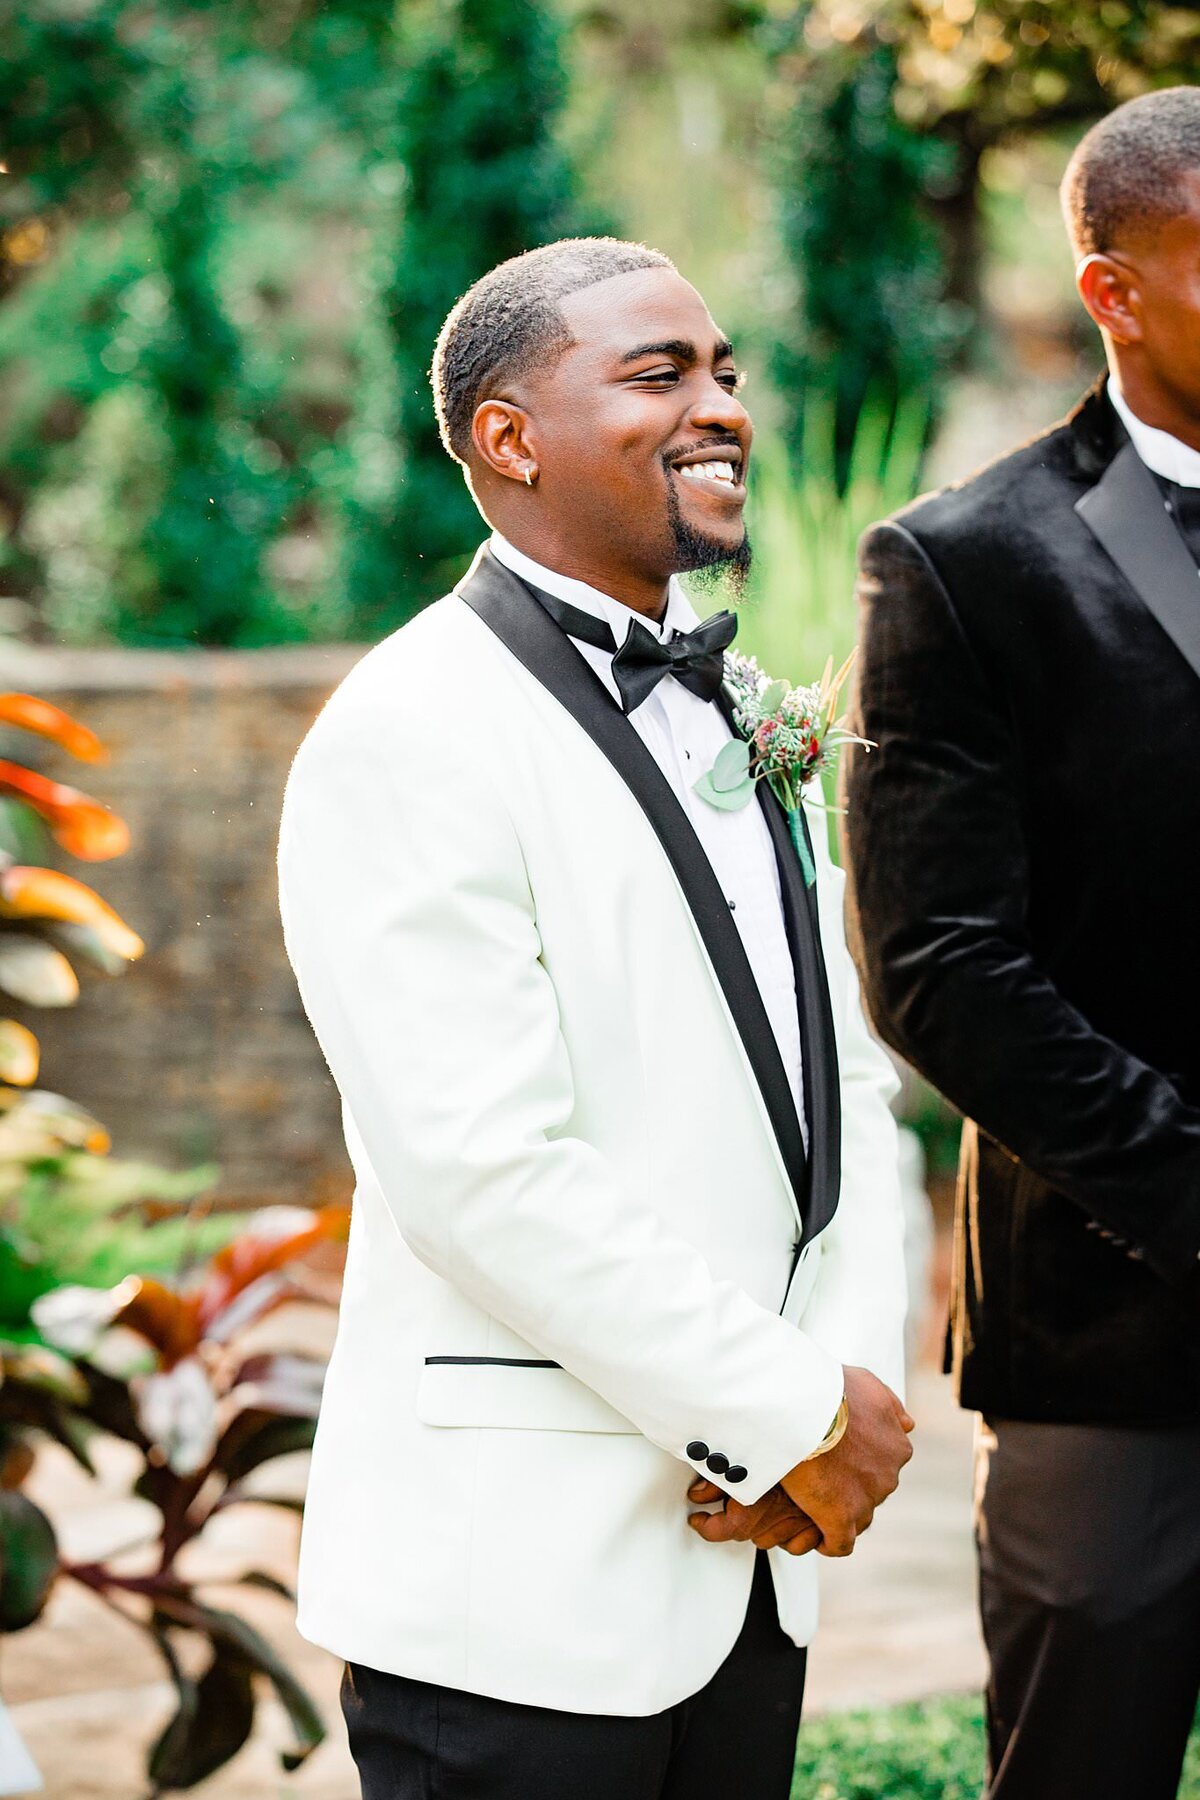 Groom seeing his wife coming down the aisle for the ceremony, he is wearing a white jacket with black detailing